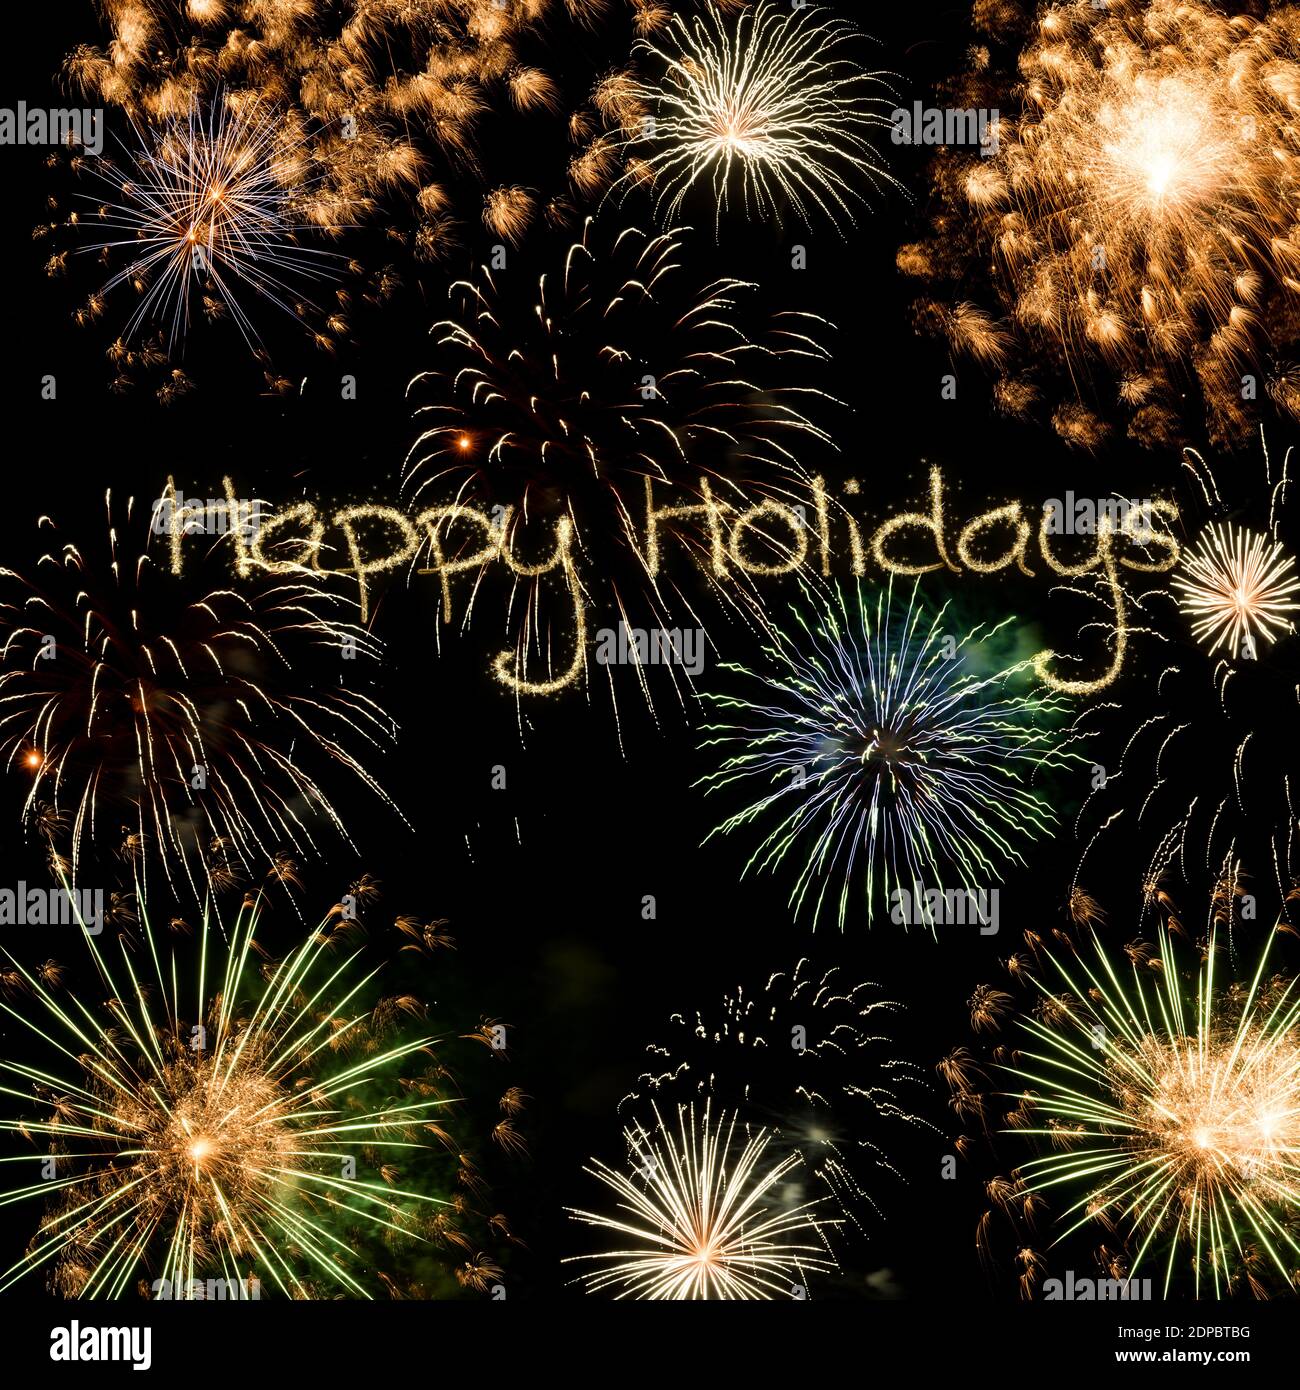 New Year fireworks background, happy holidays and new year concept Stock Photo